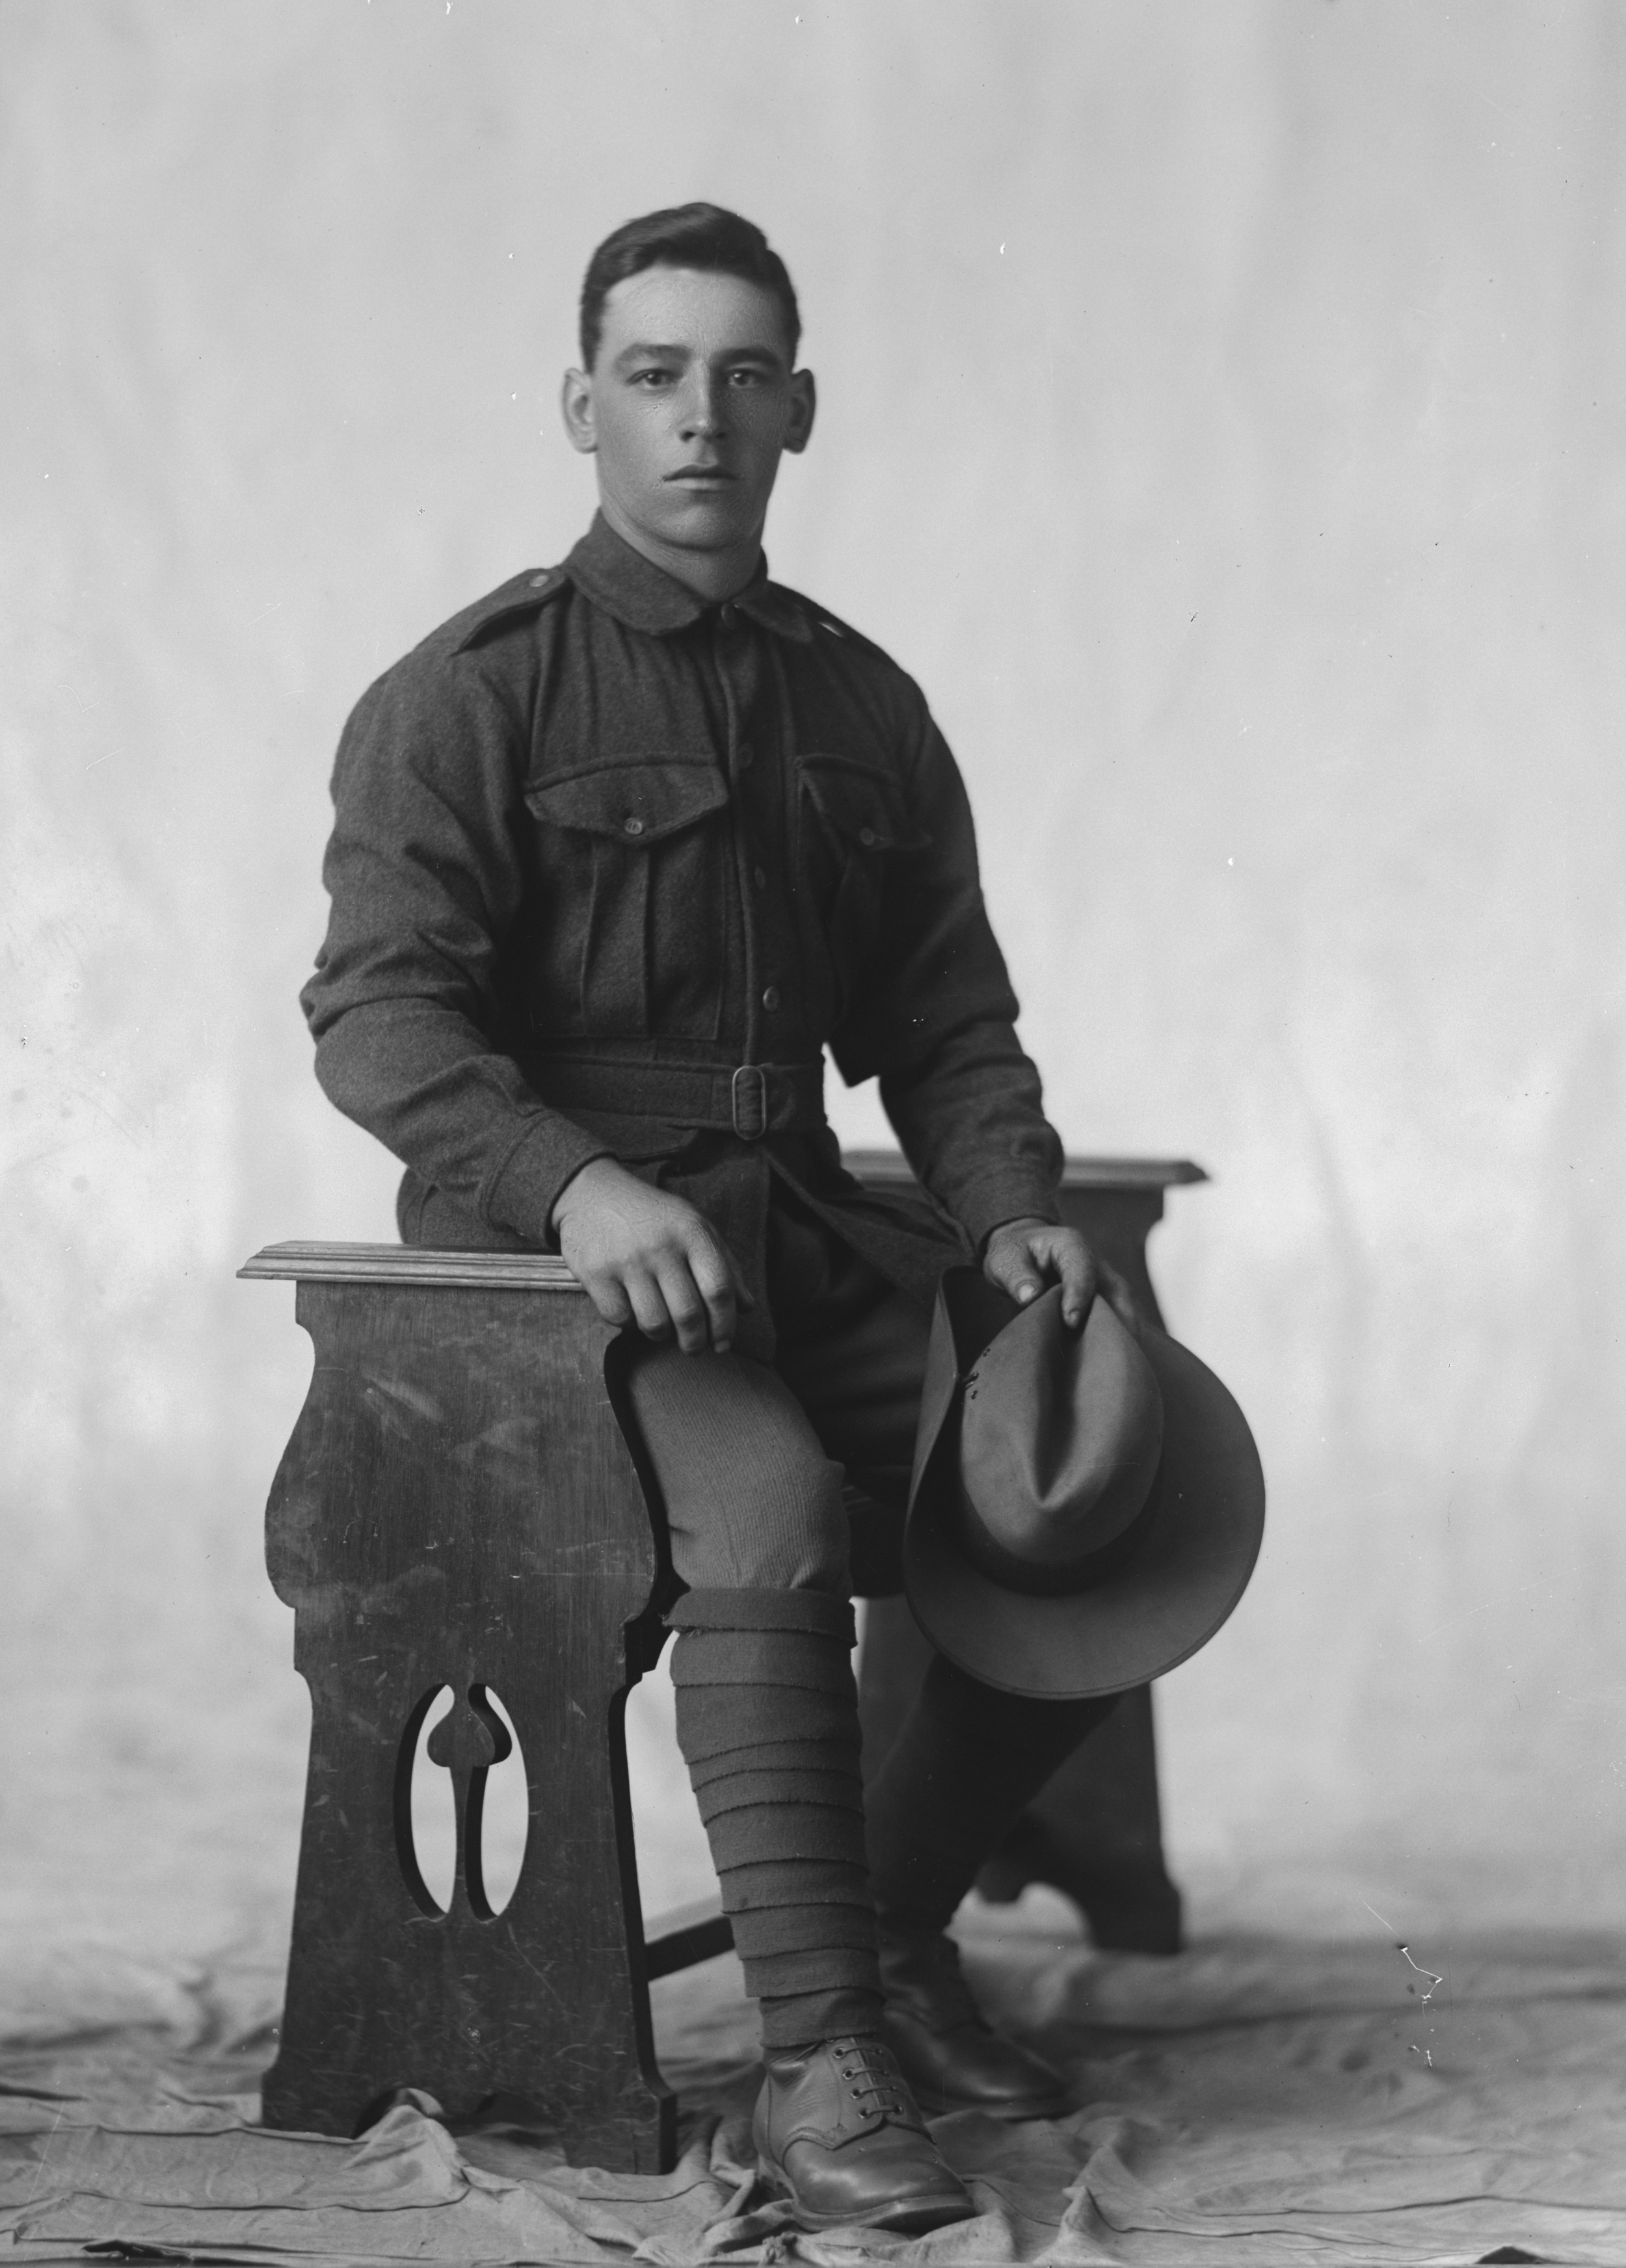 Photographed at the Dease Studio, 117 Barrack Street Perth WA Image courtesy of the State Library of Western Australia: 108124PD